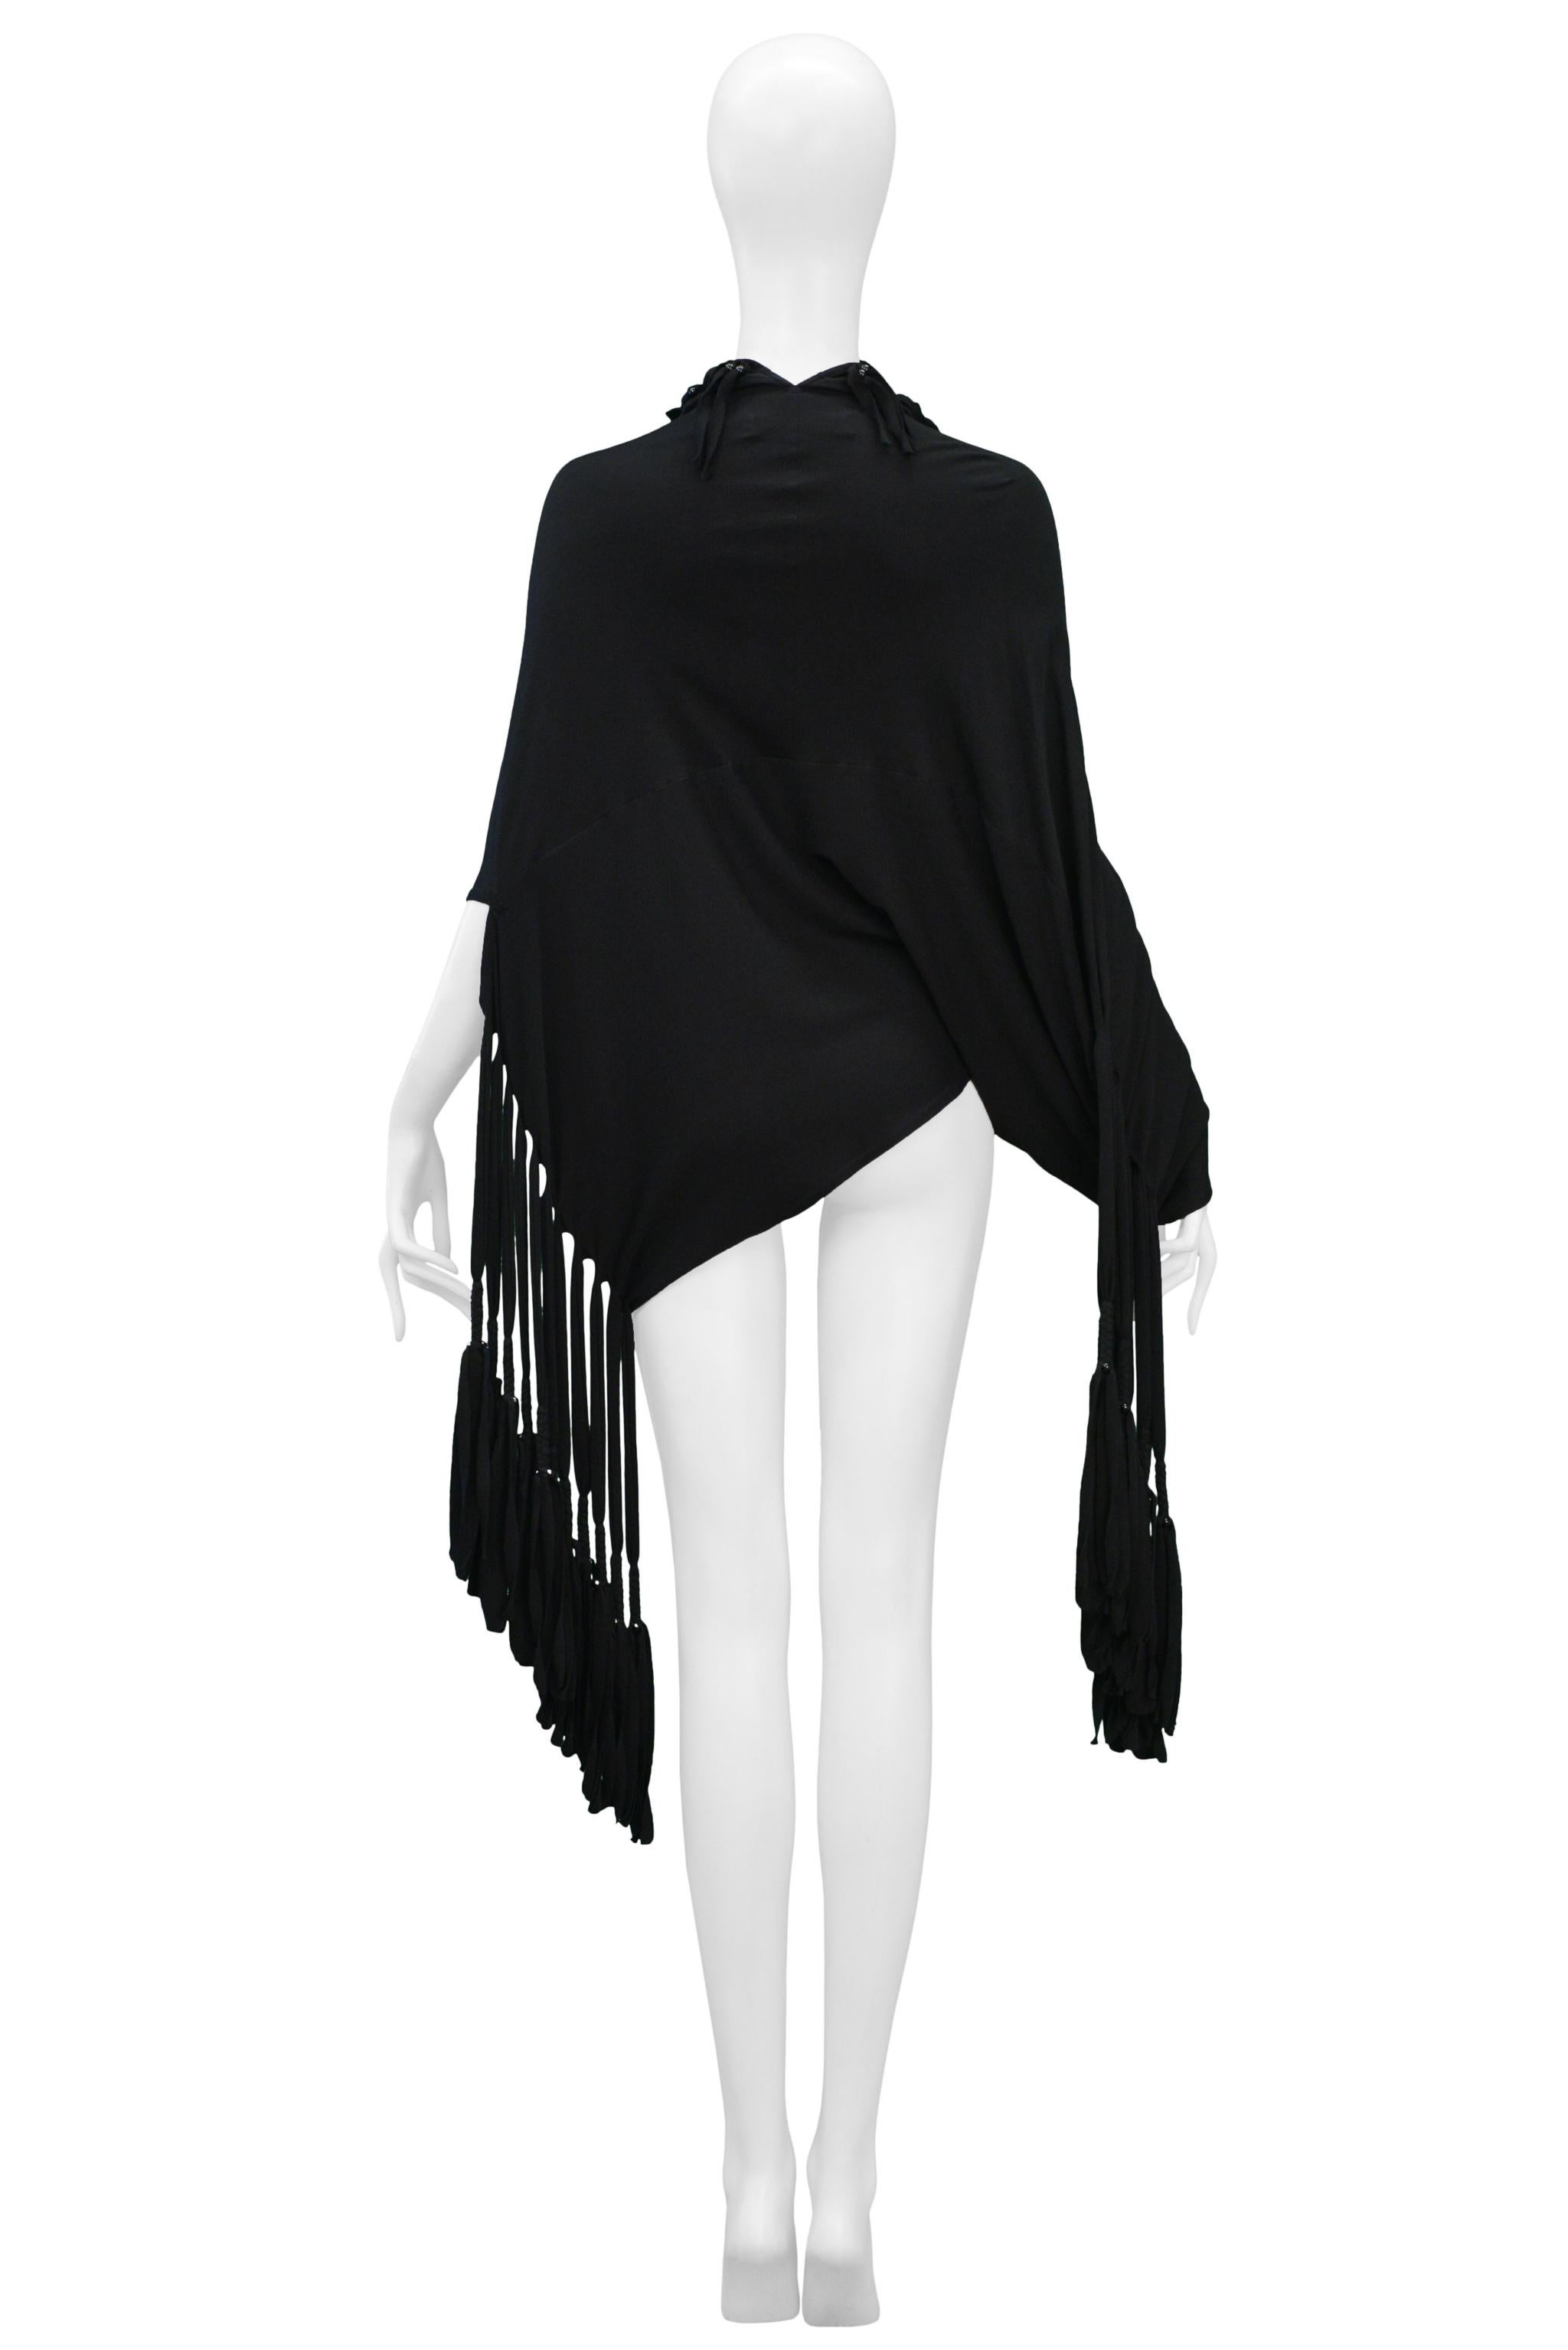 Junya Watanabe Black Braided & Fringe Top 2014 In Good Condition For Sale In Los Angeles, CA